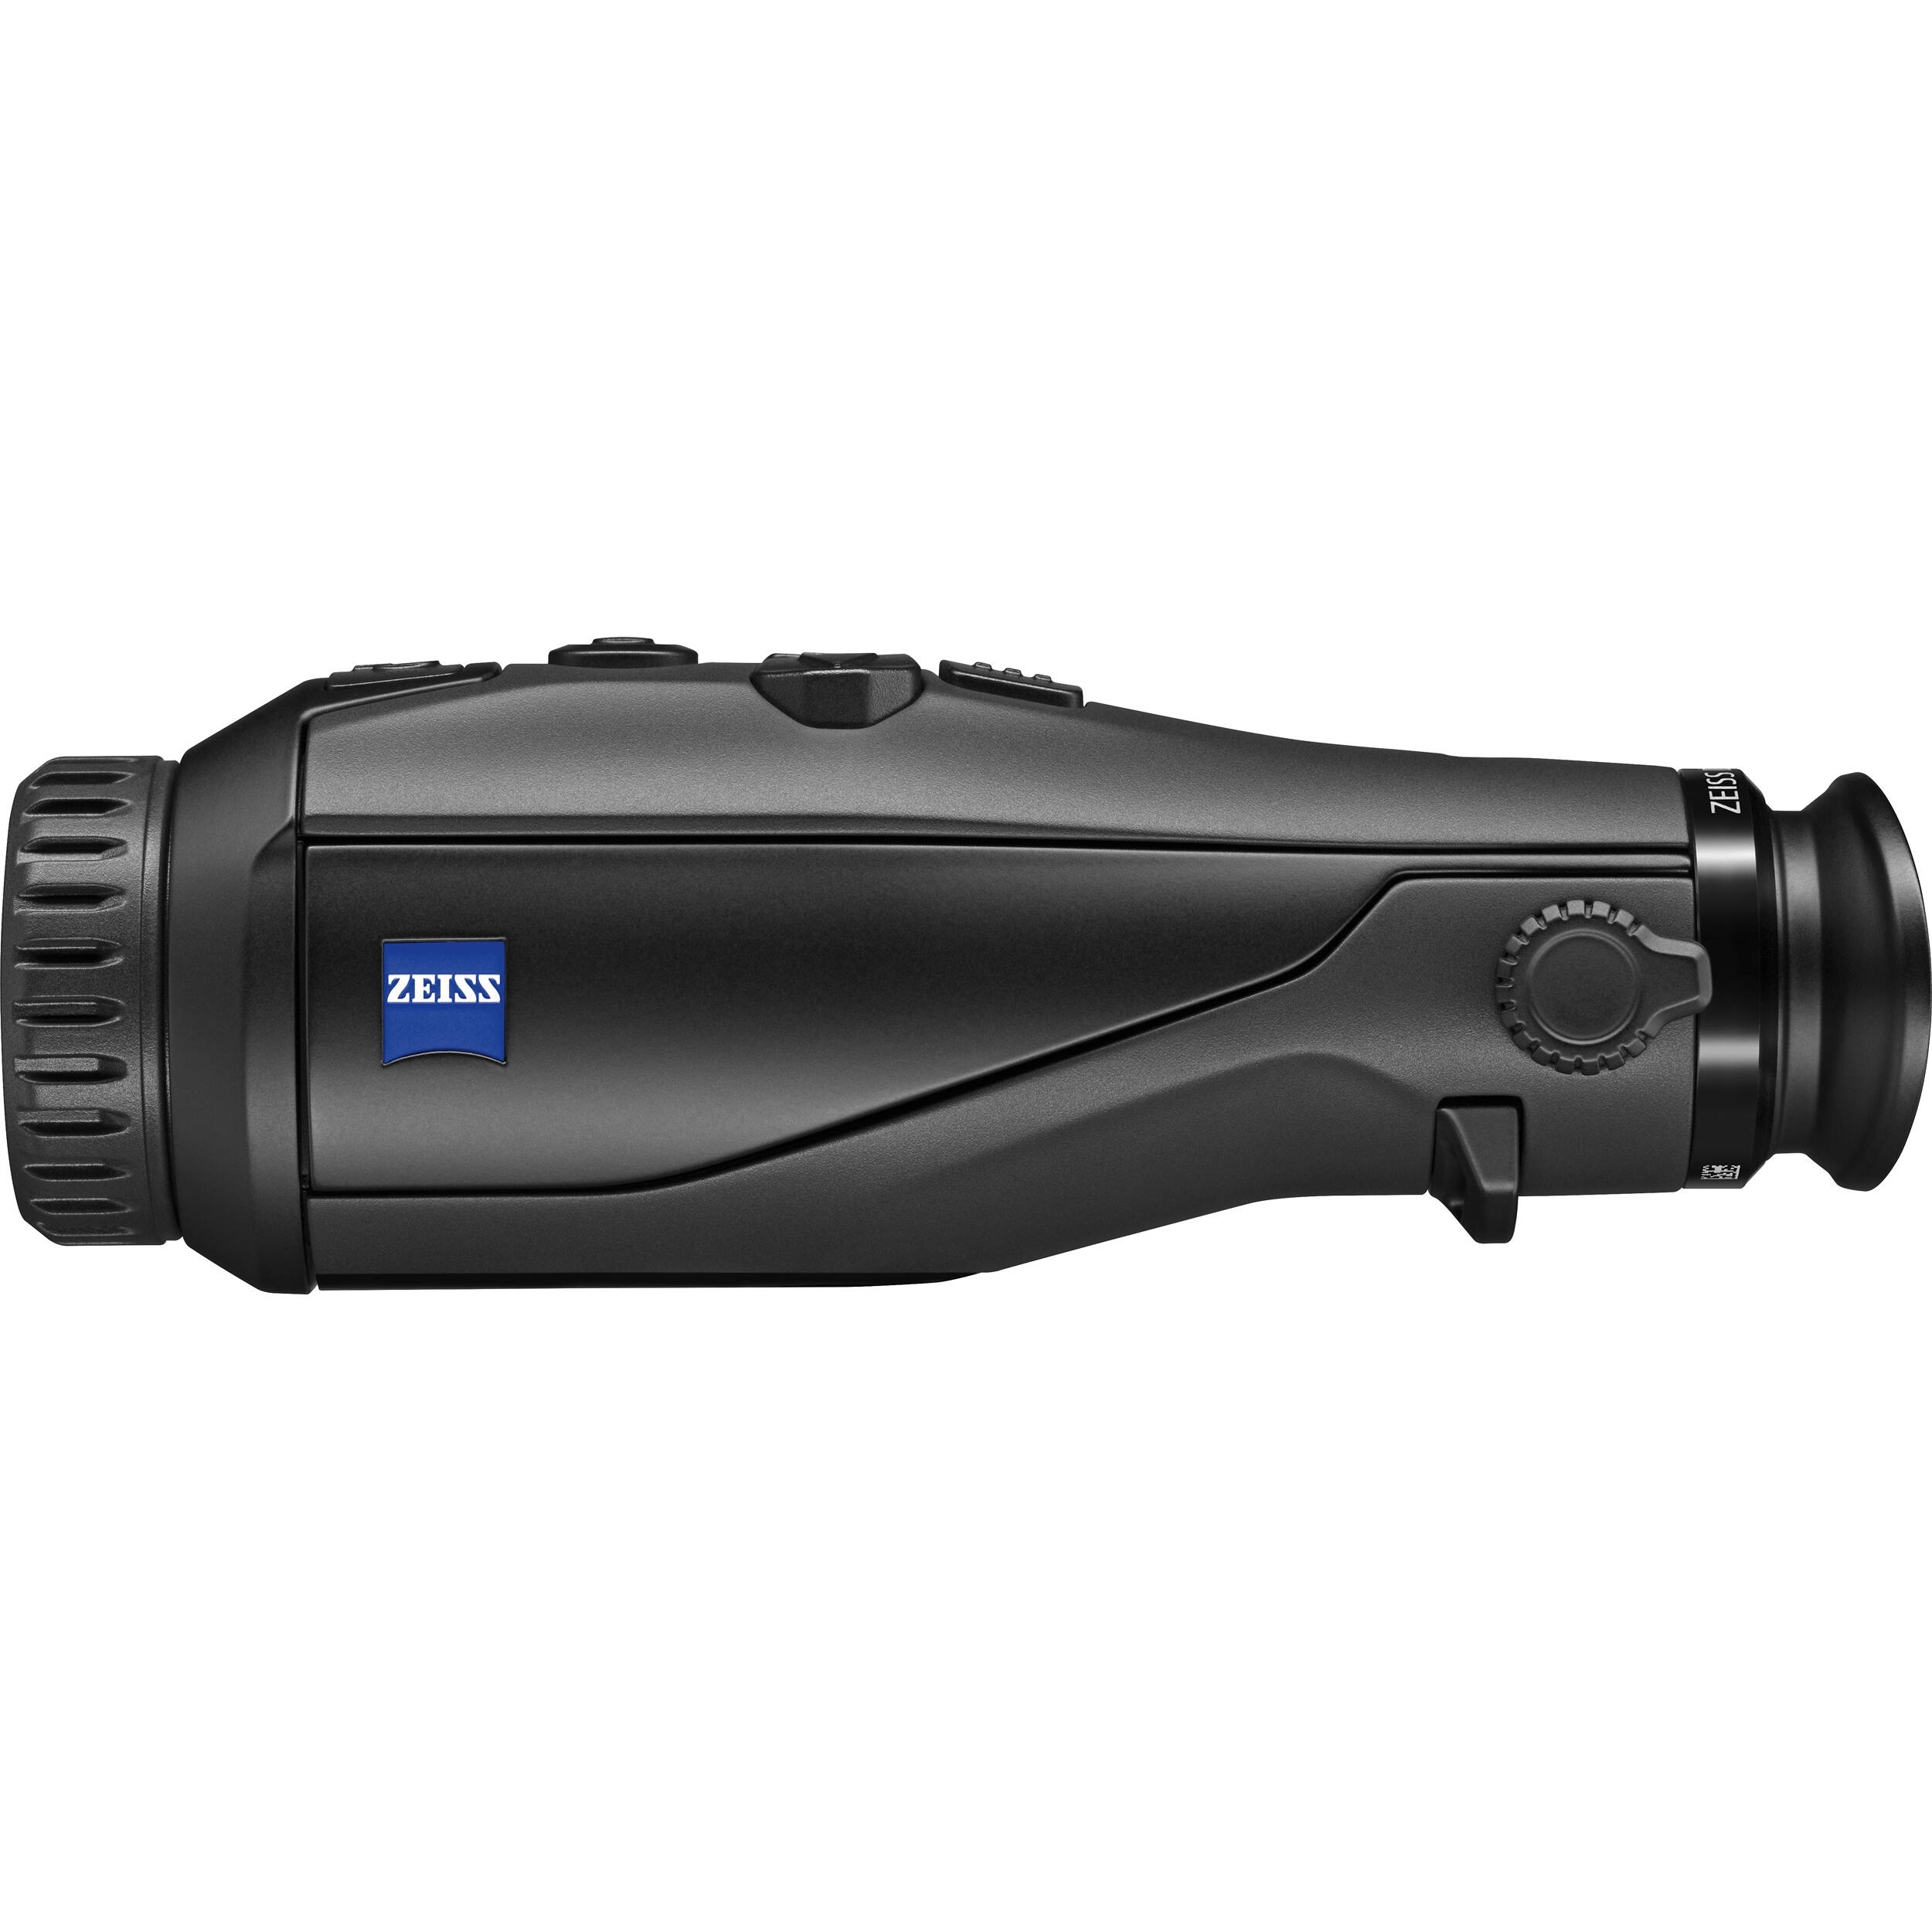 Zeiss DTI 3/35 Thermal Imaging Camera